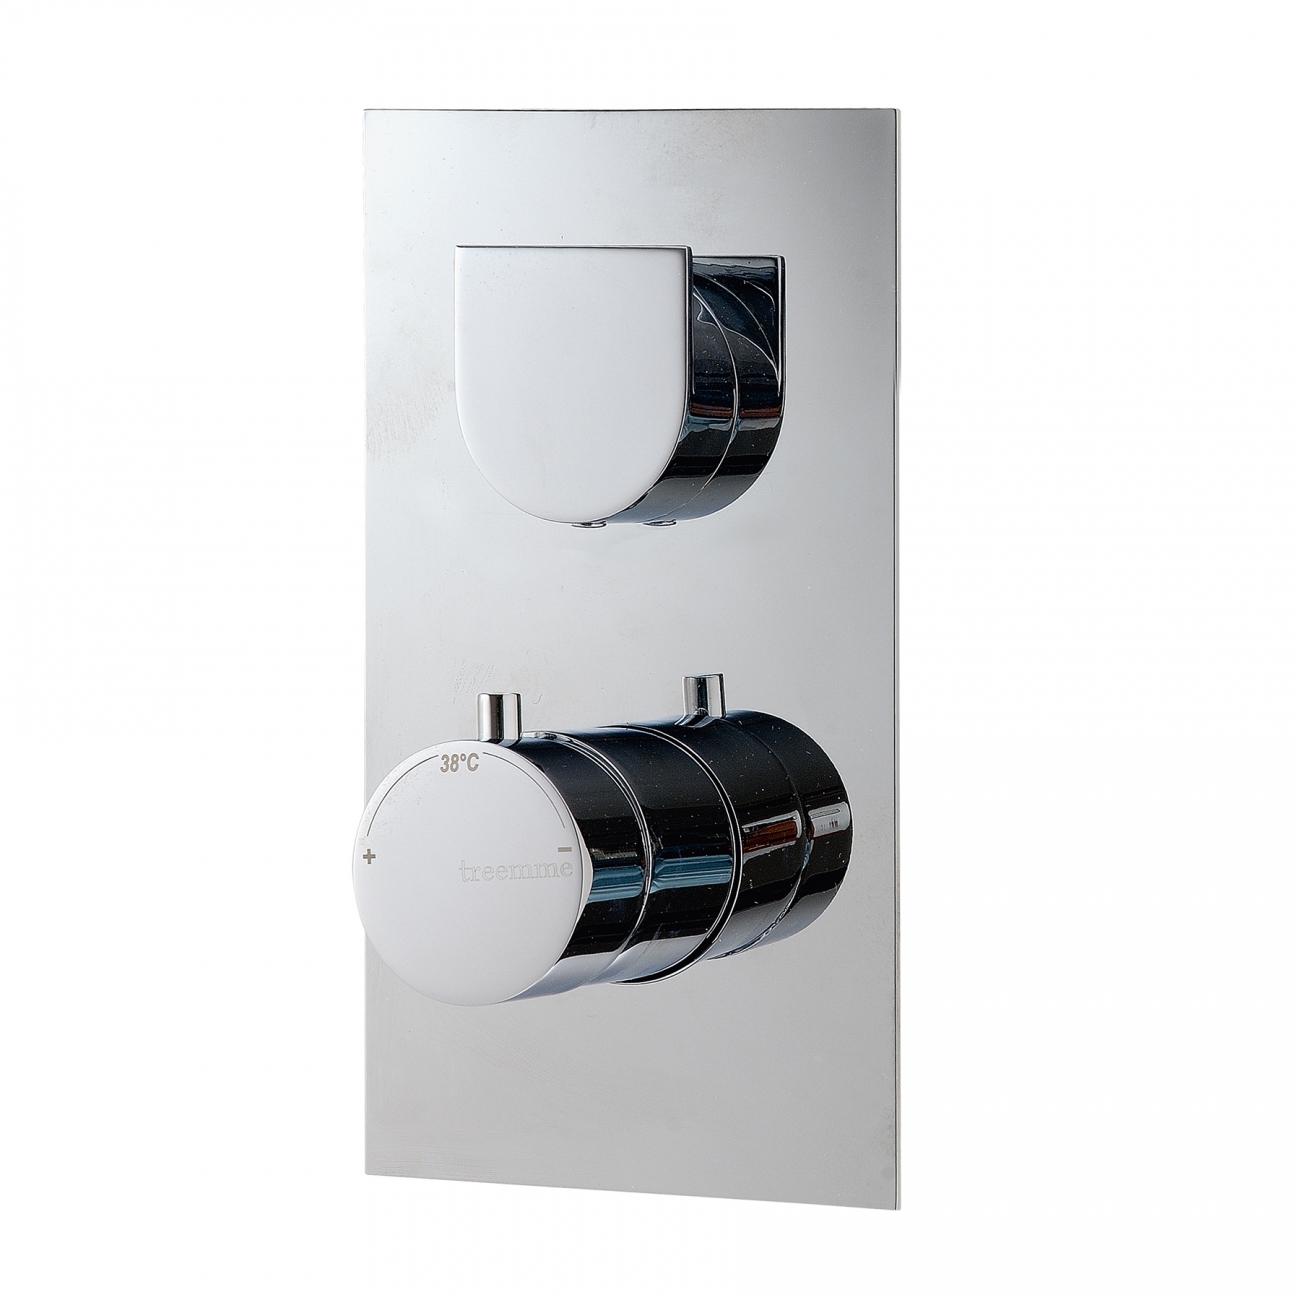 Treemme Ran thermostatic shower mixer